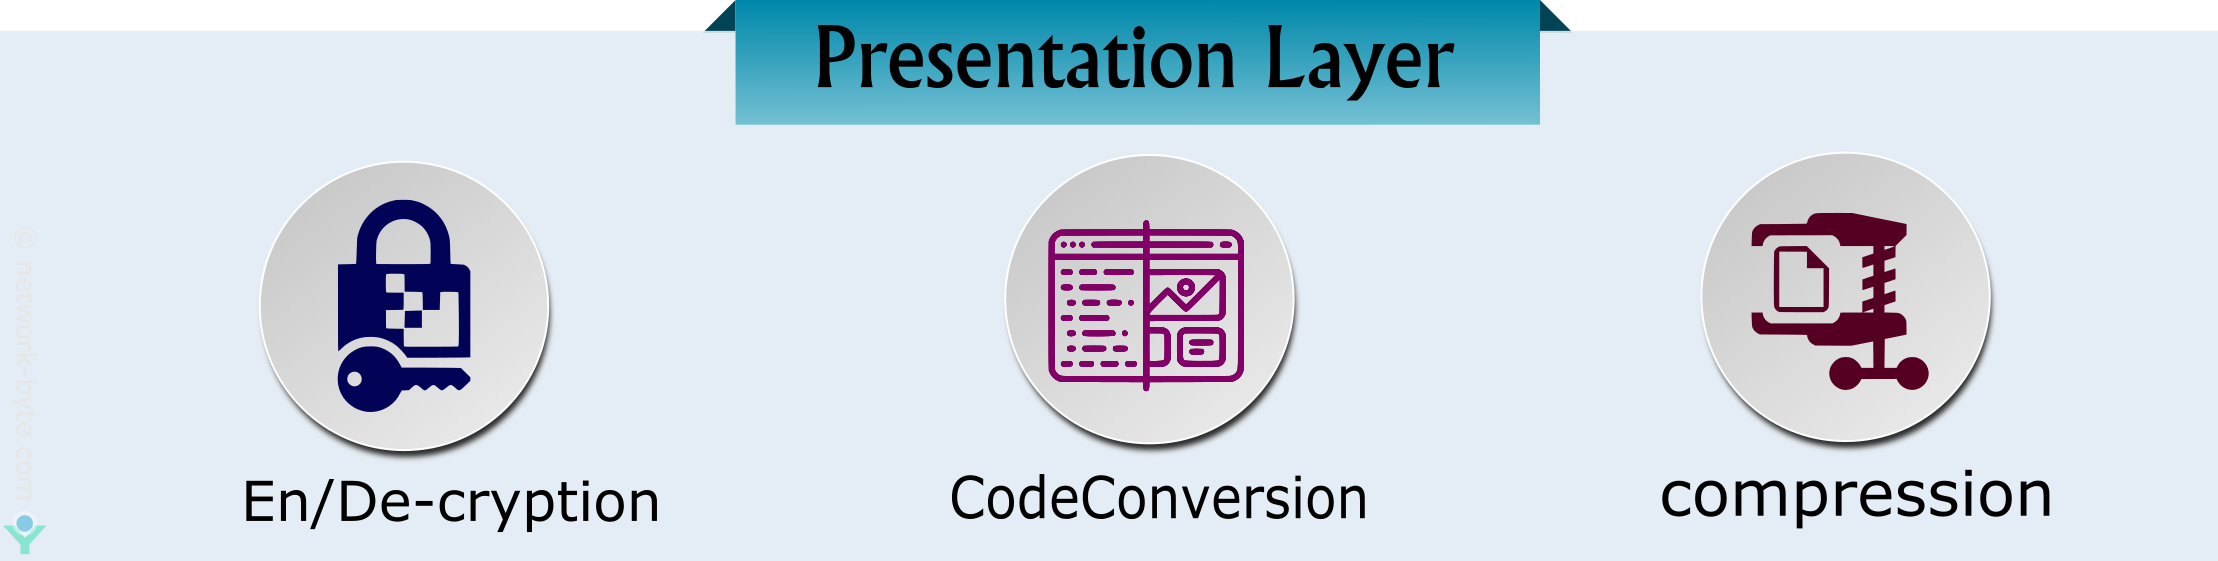 devices in presentation layer